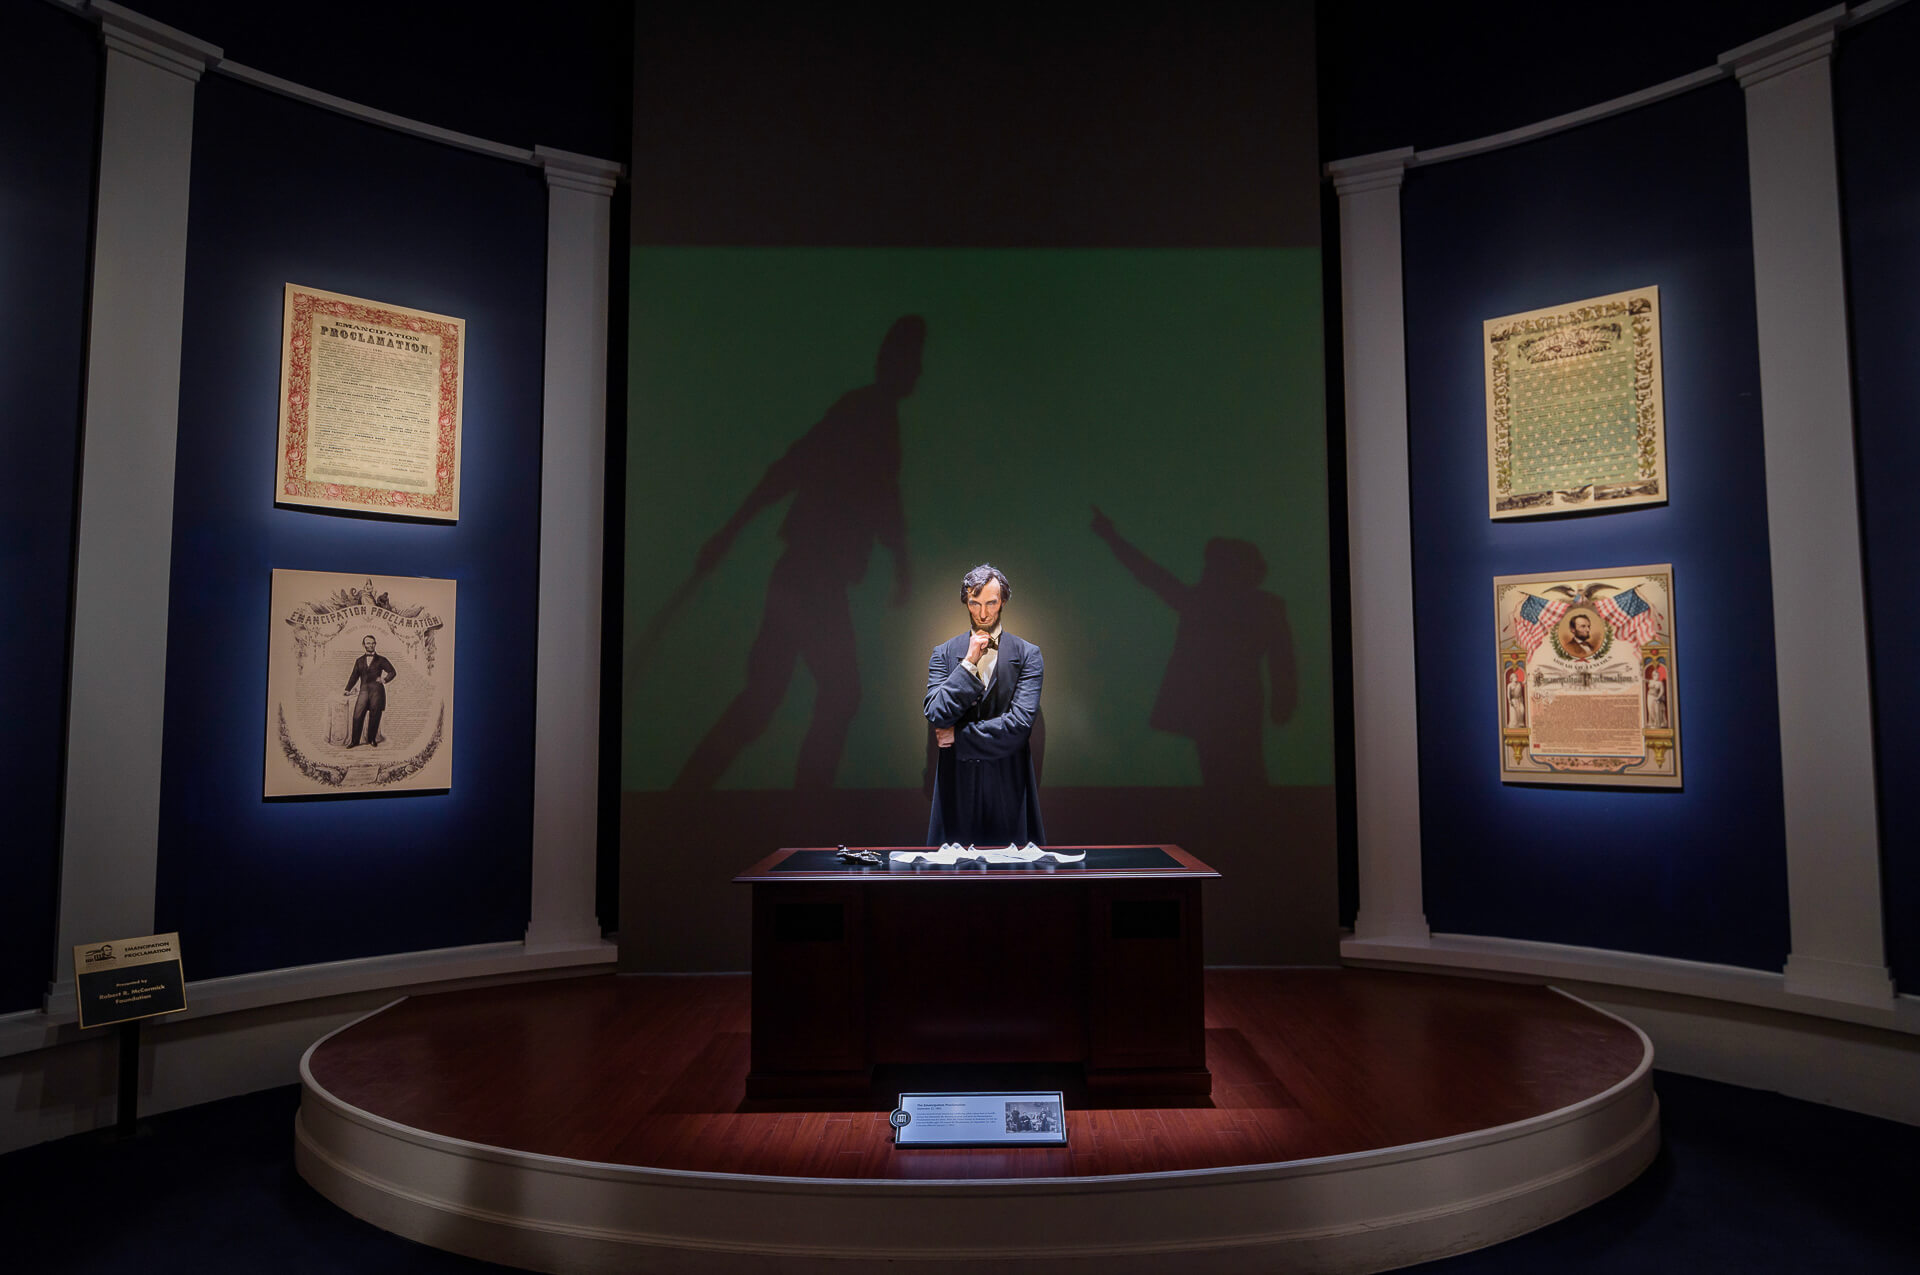 Abe Lincoln Museum in Springfield IL